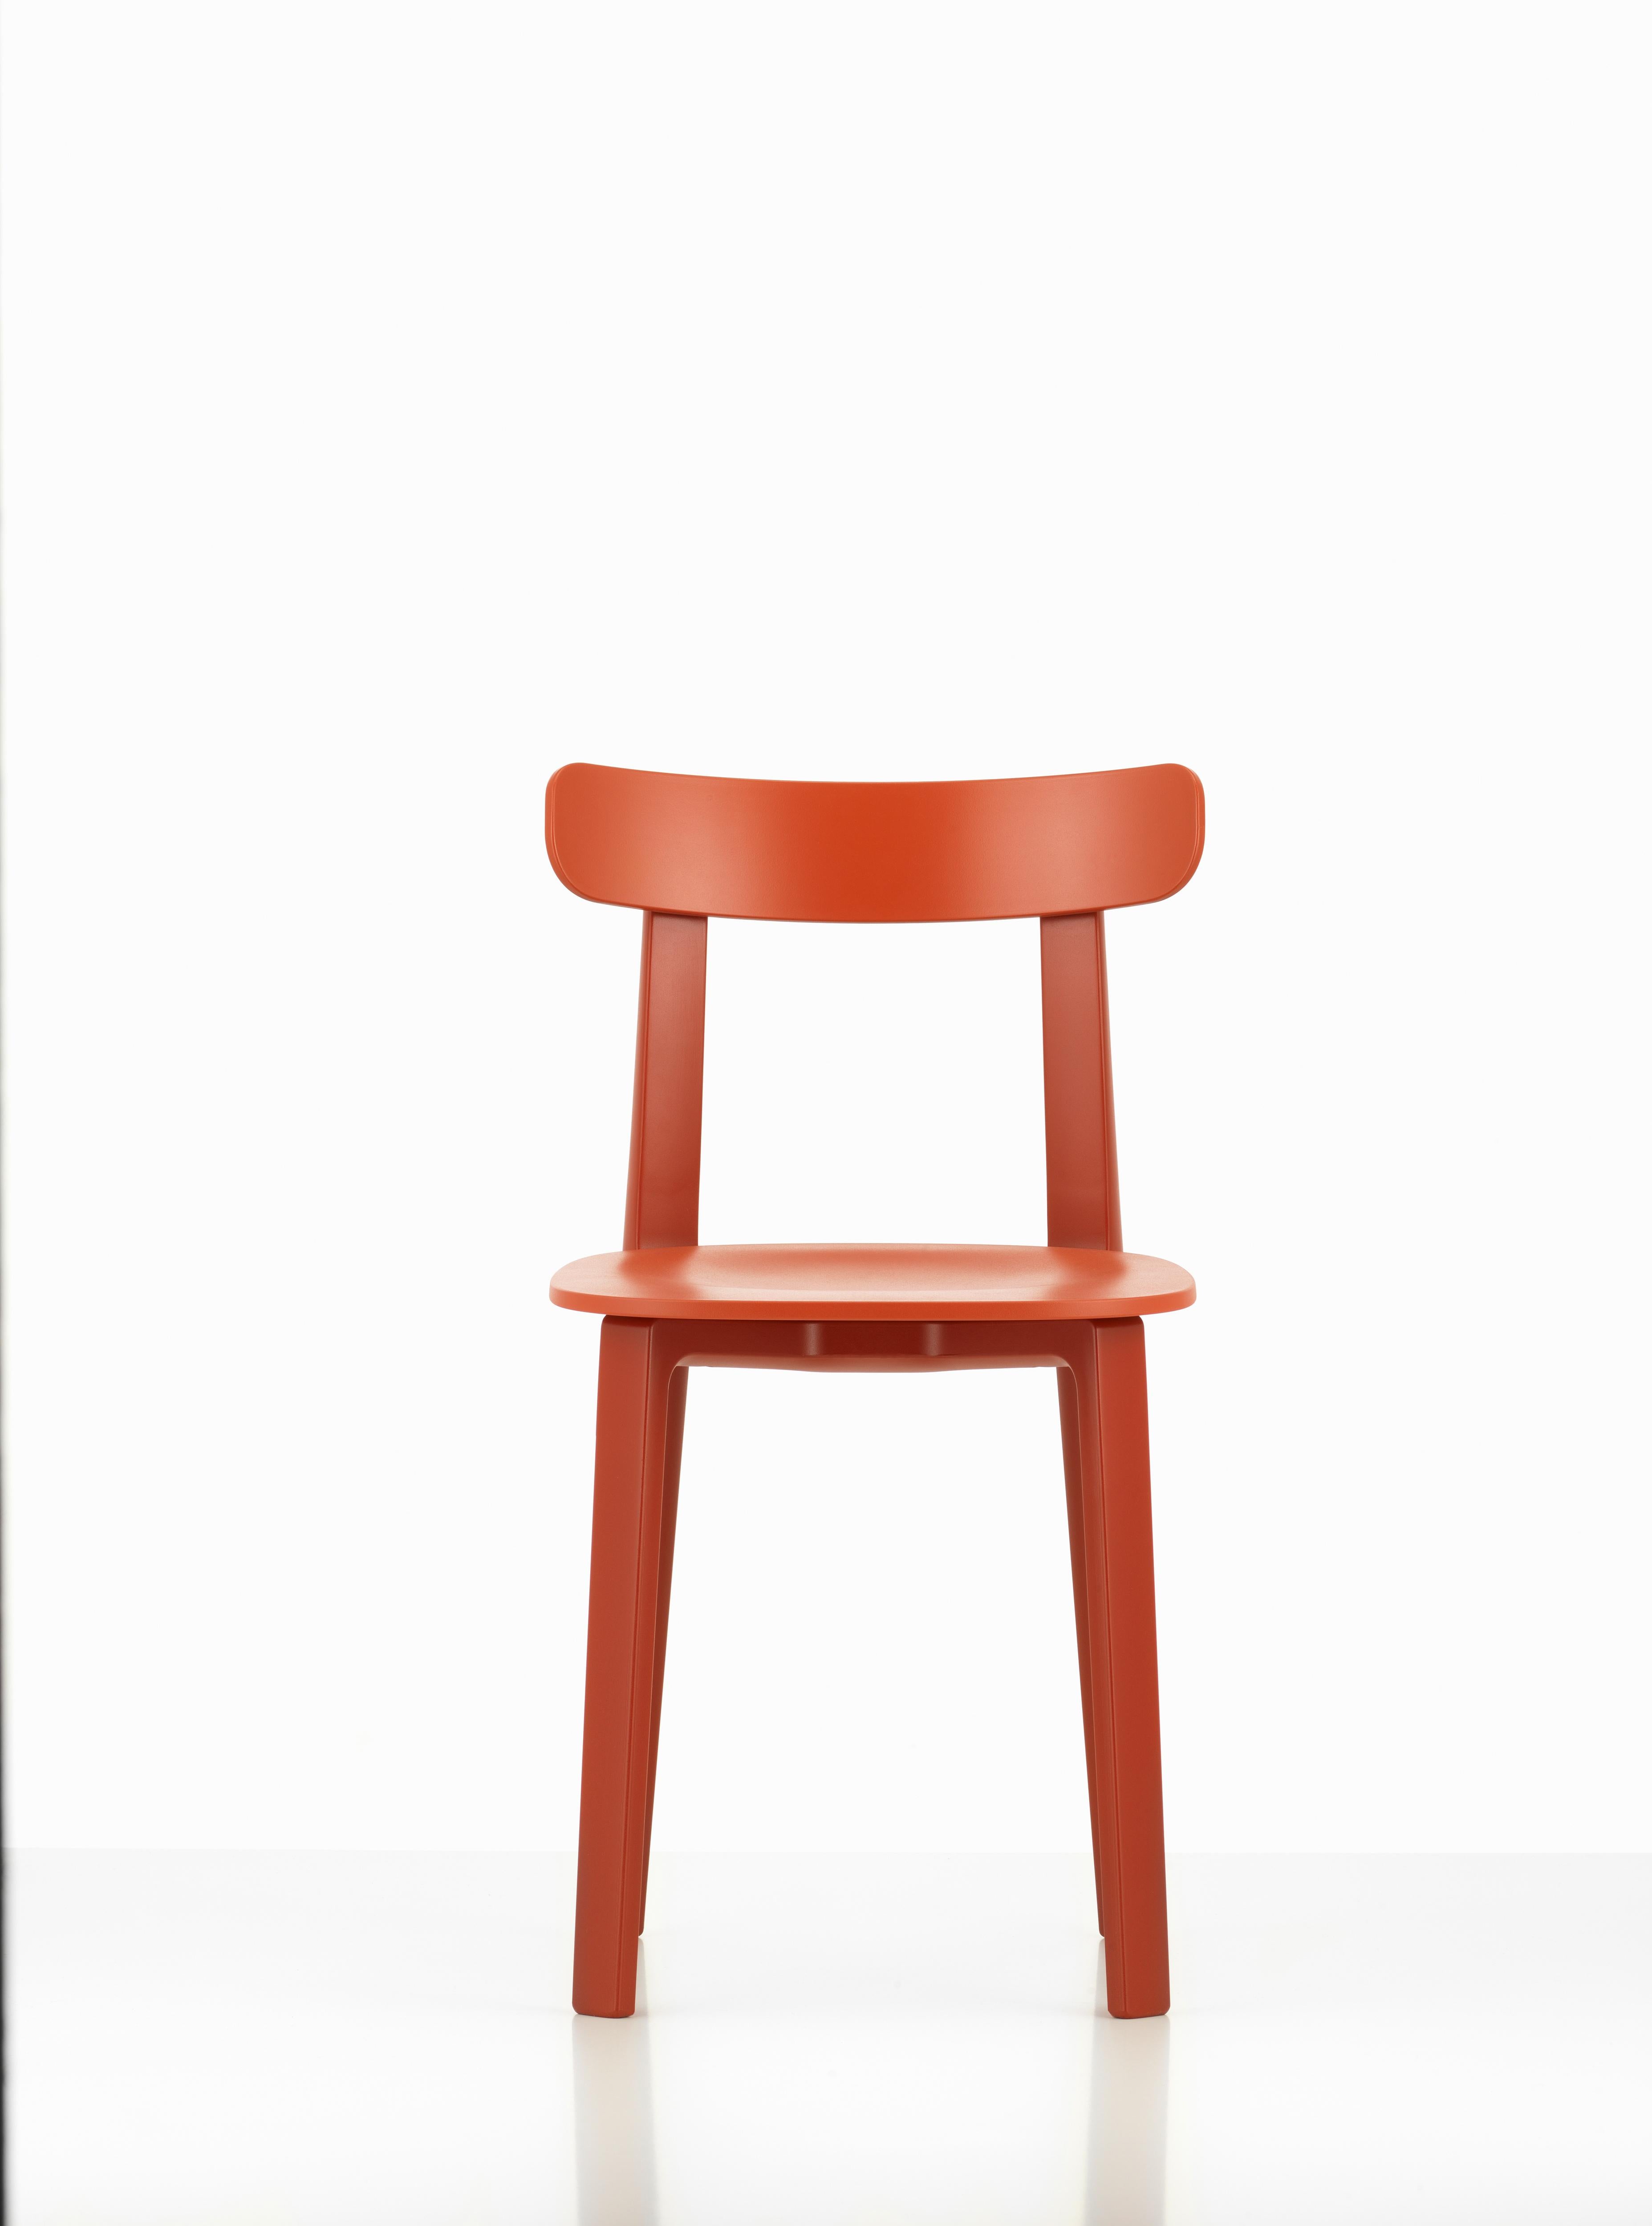 These products are only available in the United States.

At first glance, the All Plastic Chair is reminiscent of the simple, classic wooden chairs that have been familiar in Europe for many decades. Utilizing a new material, the chair represents a